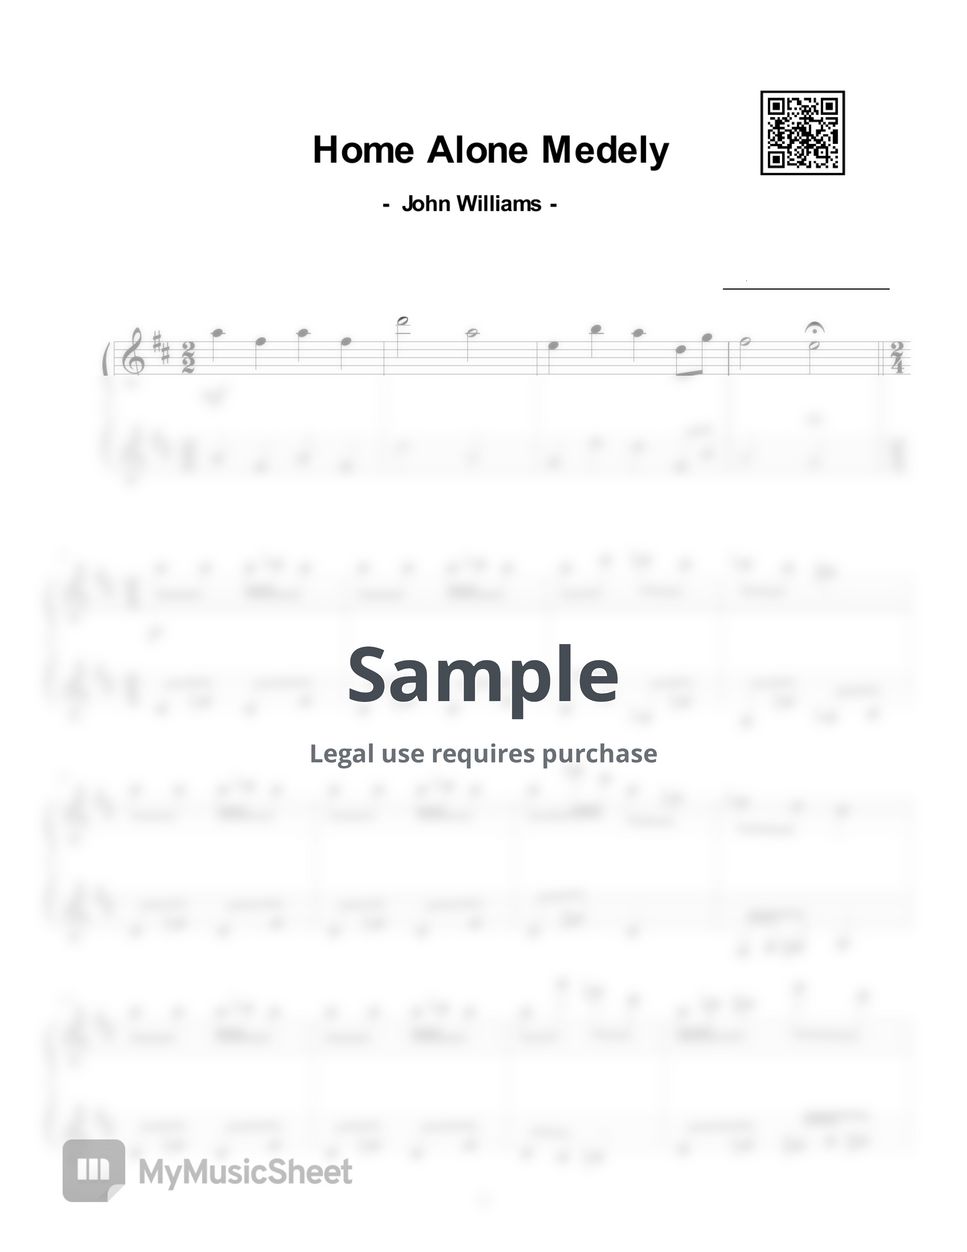 toy grandpiano music box ver. - Home Alone Medely  (5 songs) by SORA감성건반